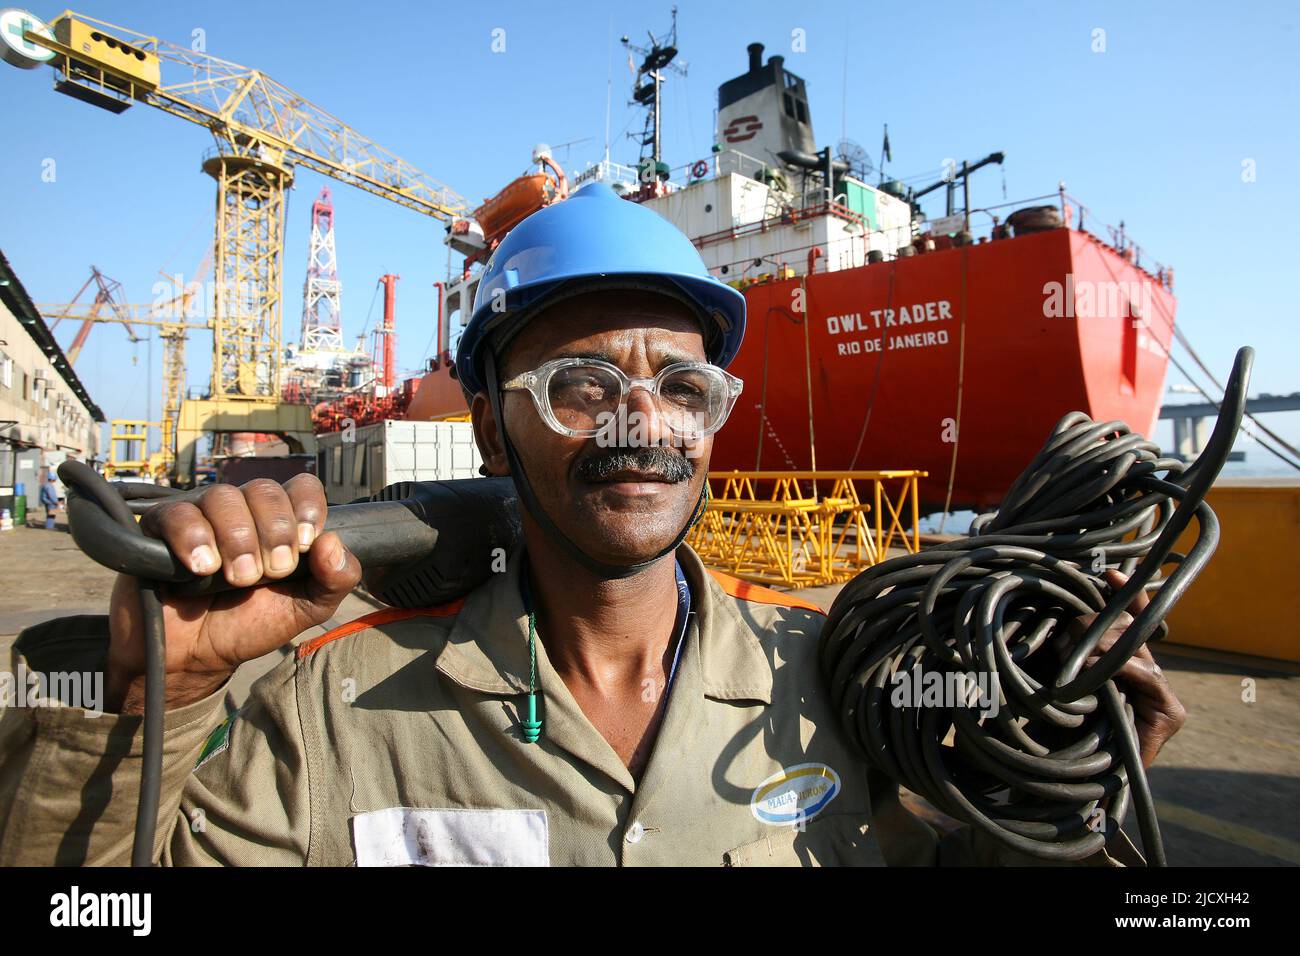 Brazil, Niteroi in Rio de Janeiro state. The Maua-Jurong shipyard, one of the biggest in the world where oilrigs and oil tankers are built. Stock Photo